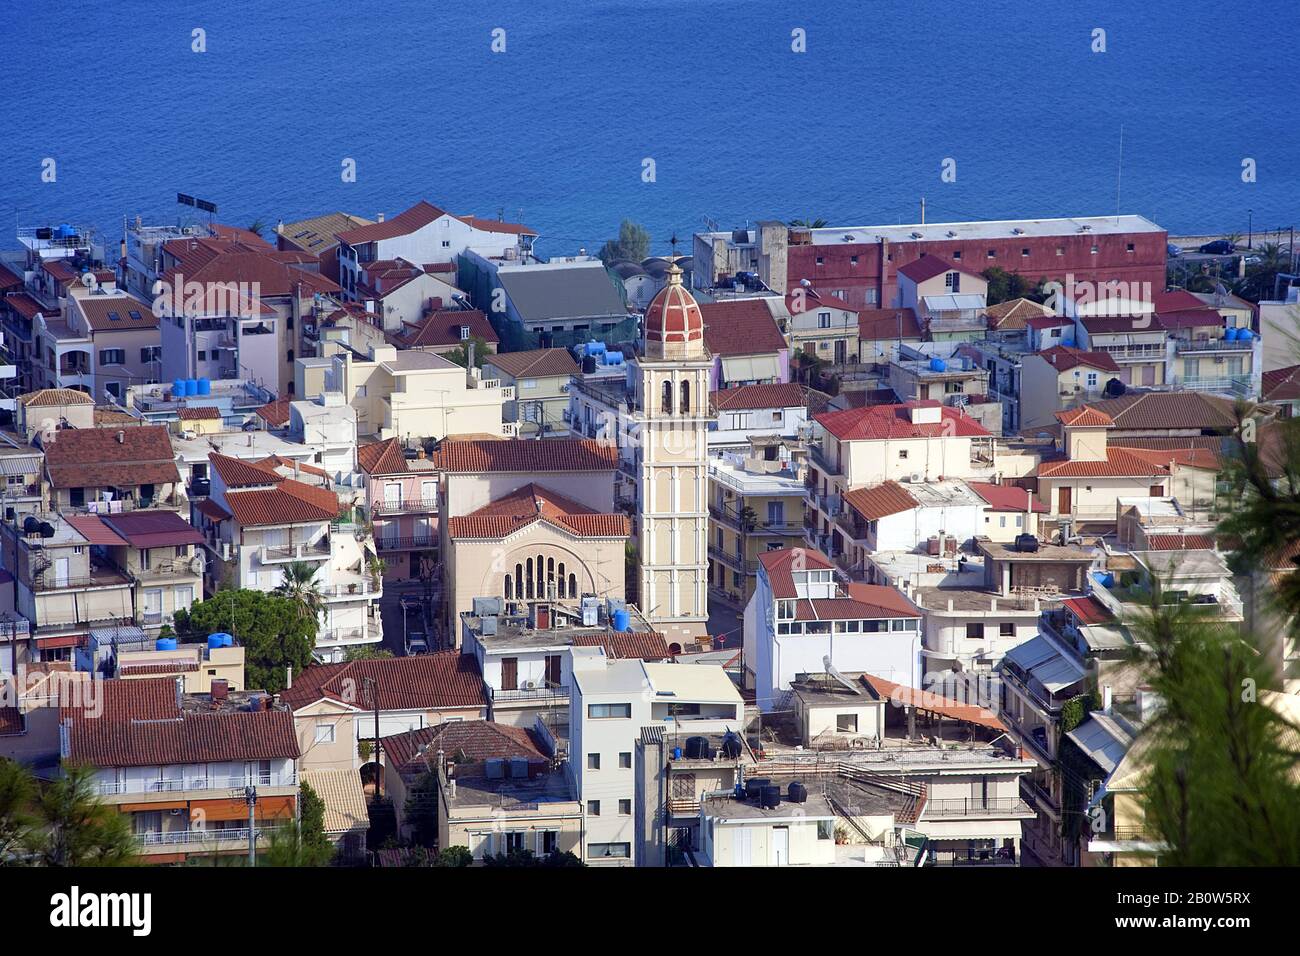 View on the town Zakynthos with church St. Nicolas, Zakynthos-town, Zakynthos island, Greece Stock Photo